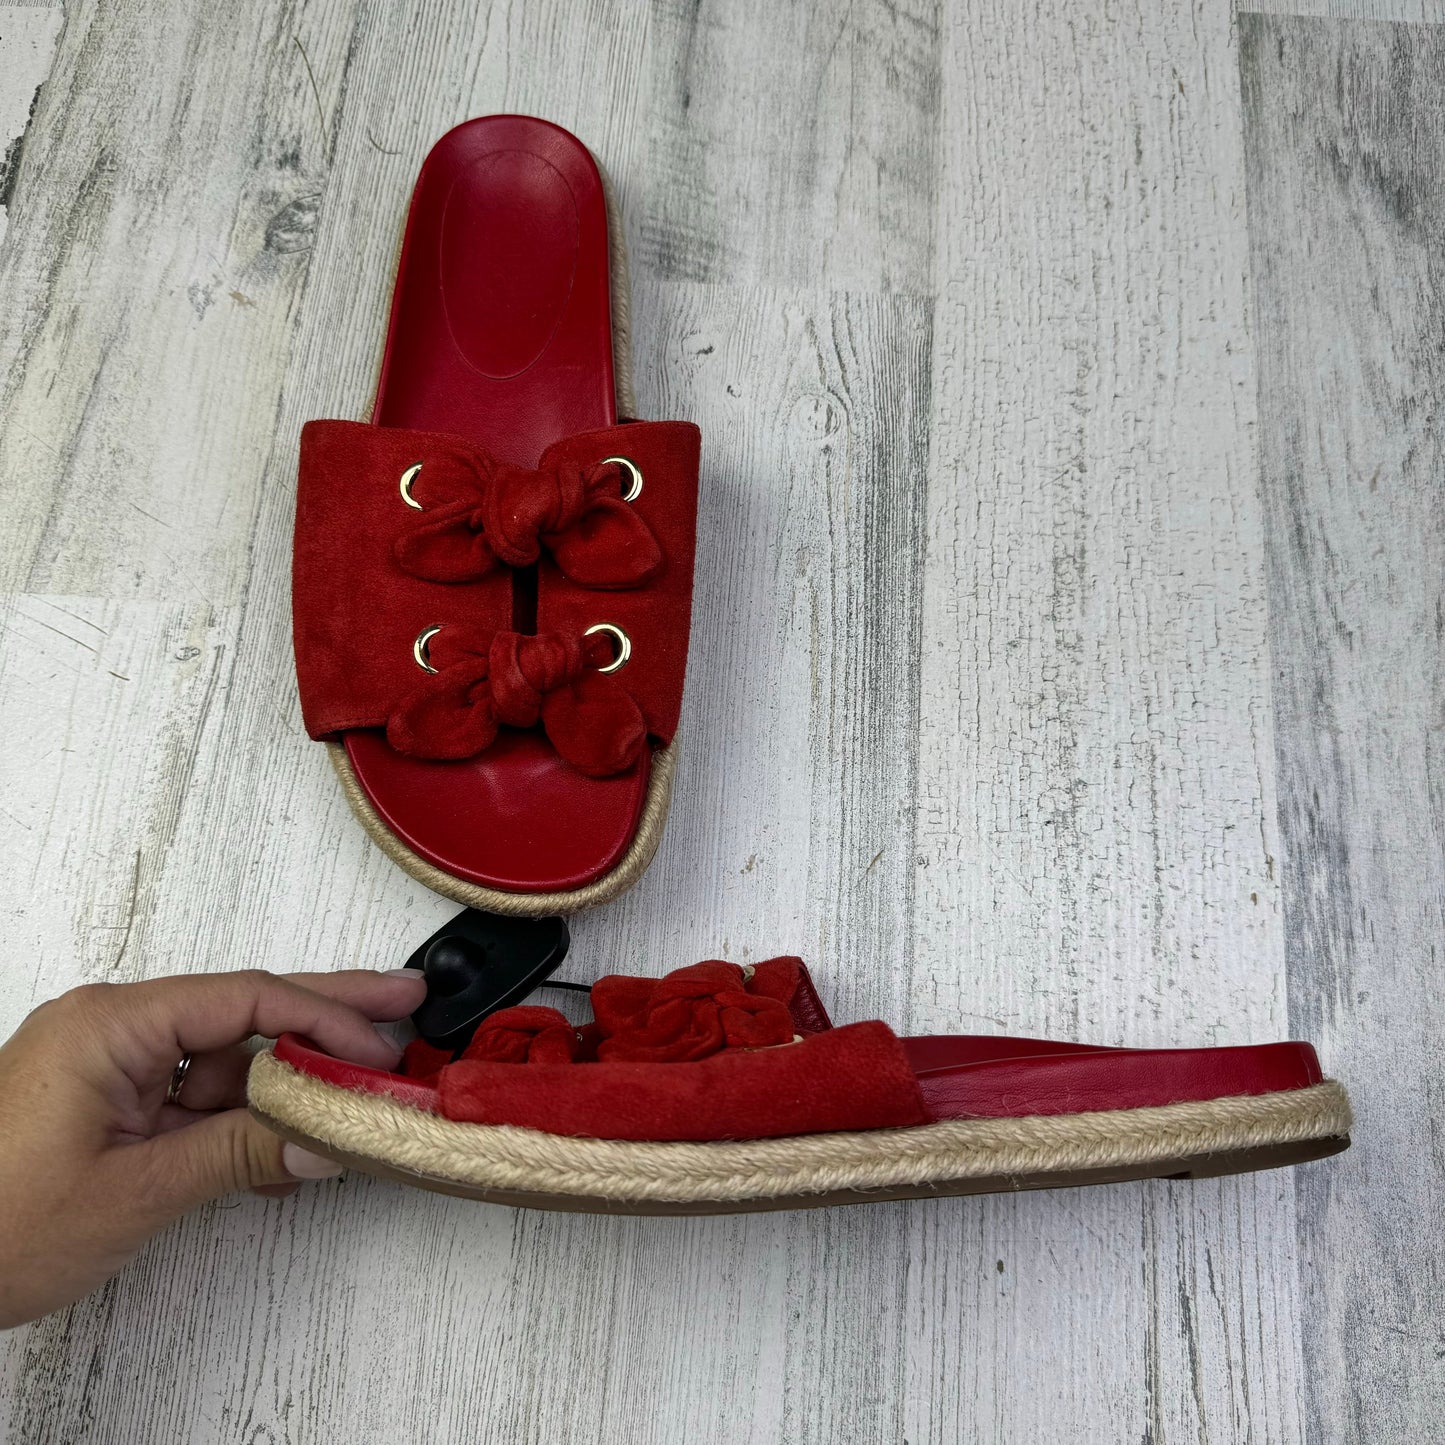 Red Sandals Flats Vince Camuto, Size 8.5